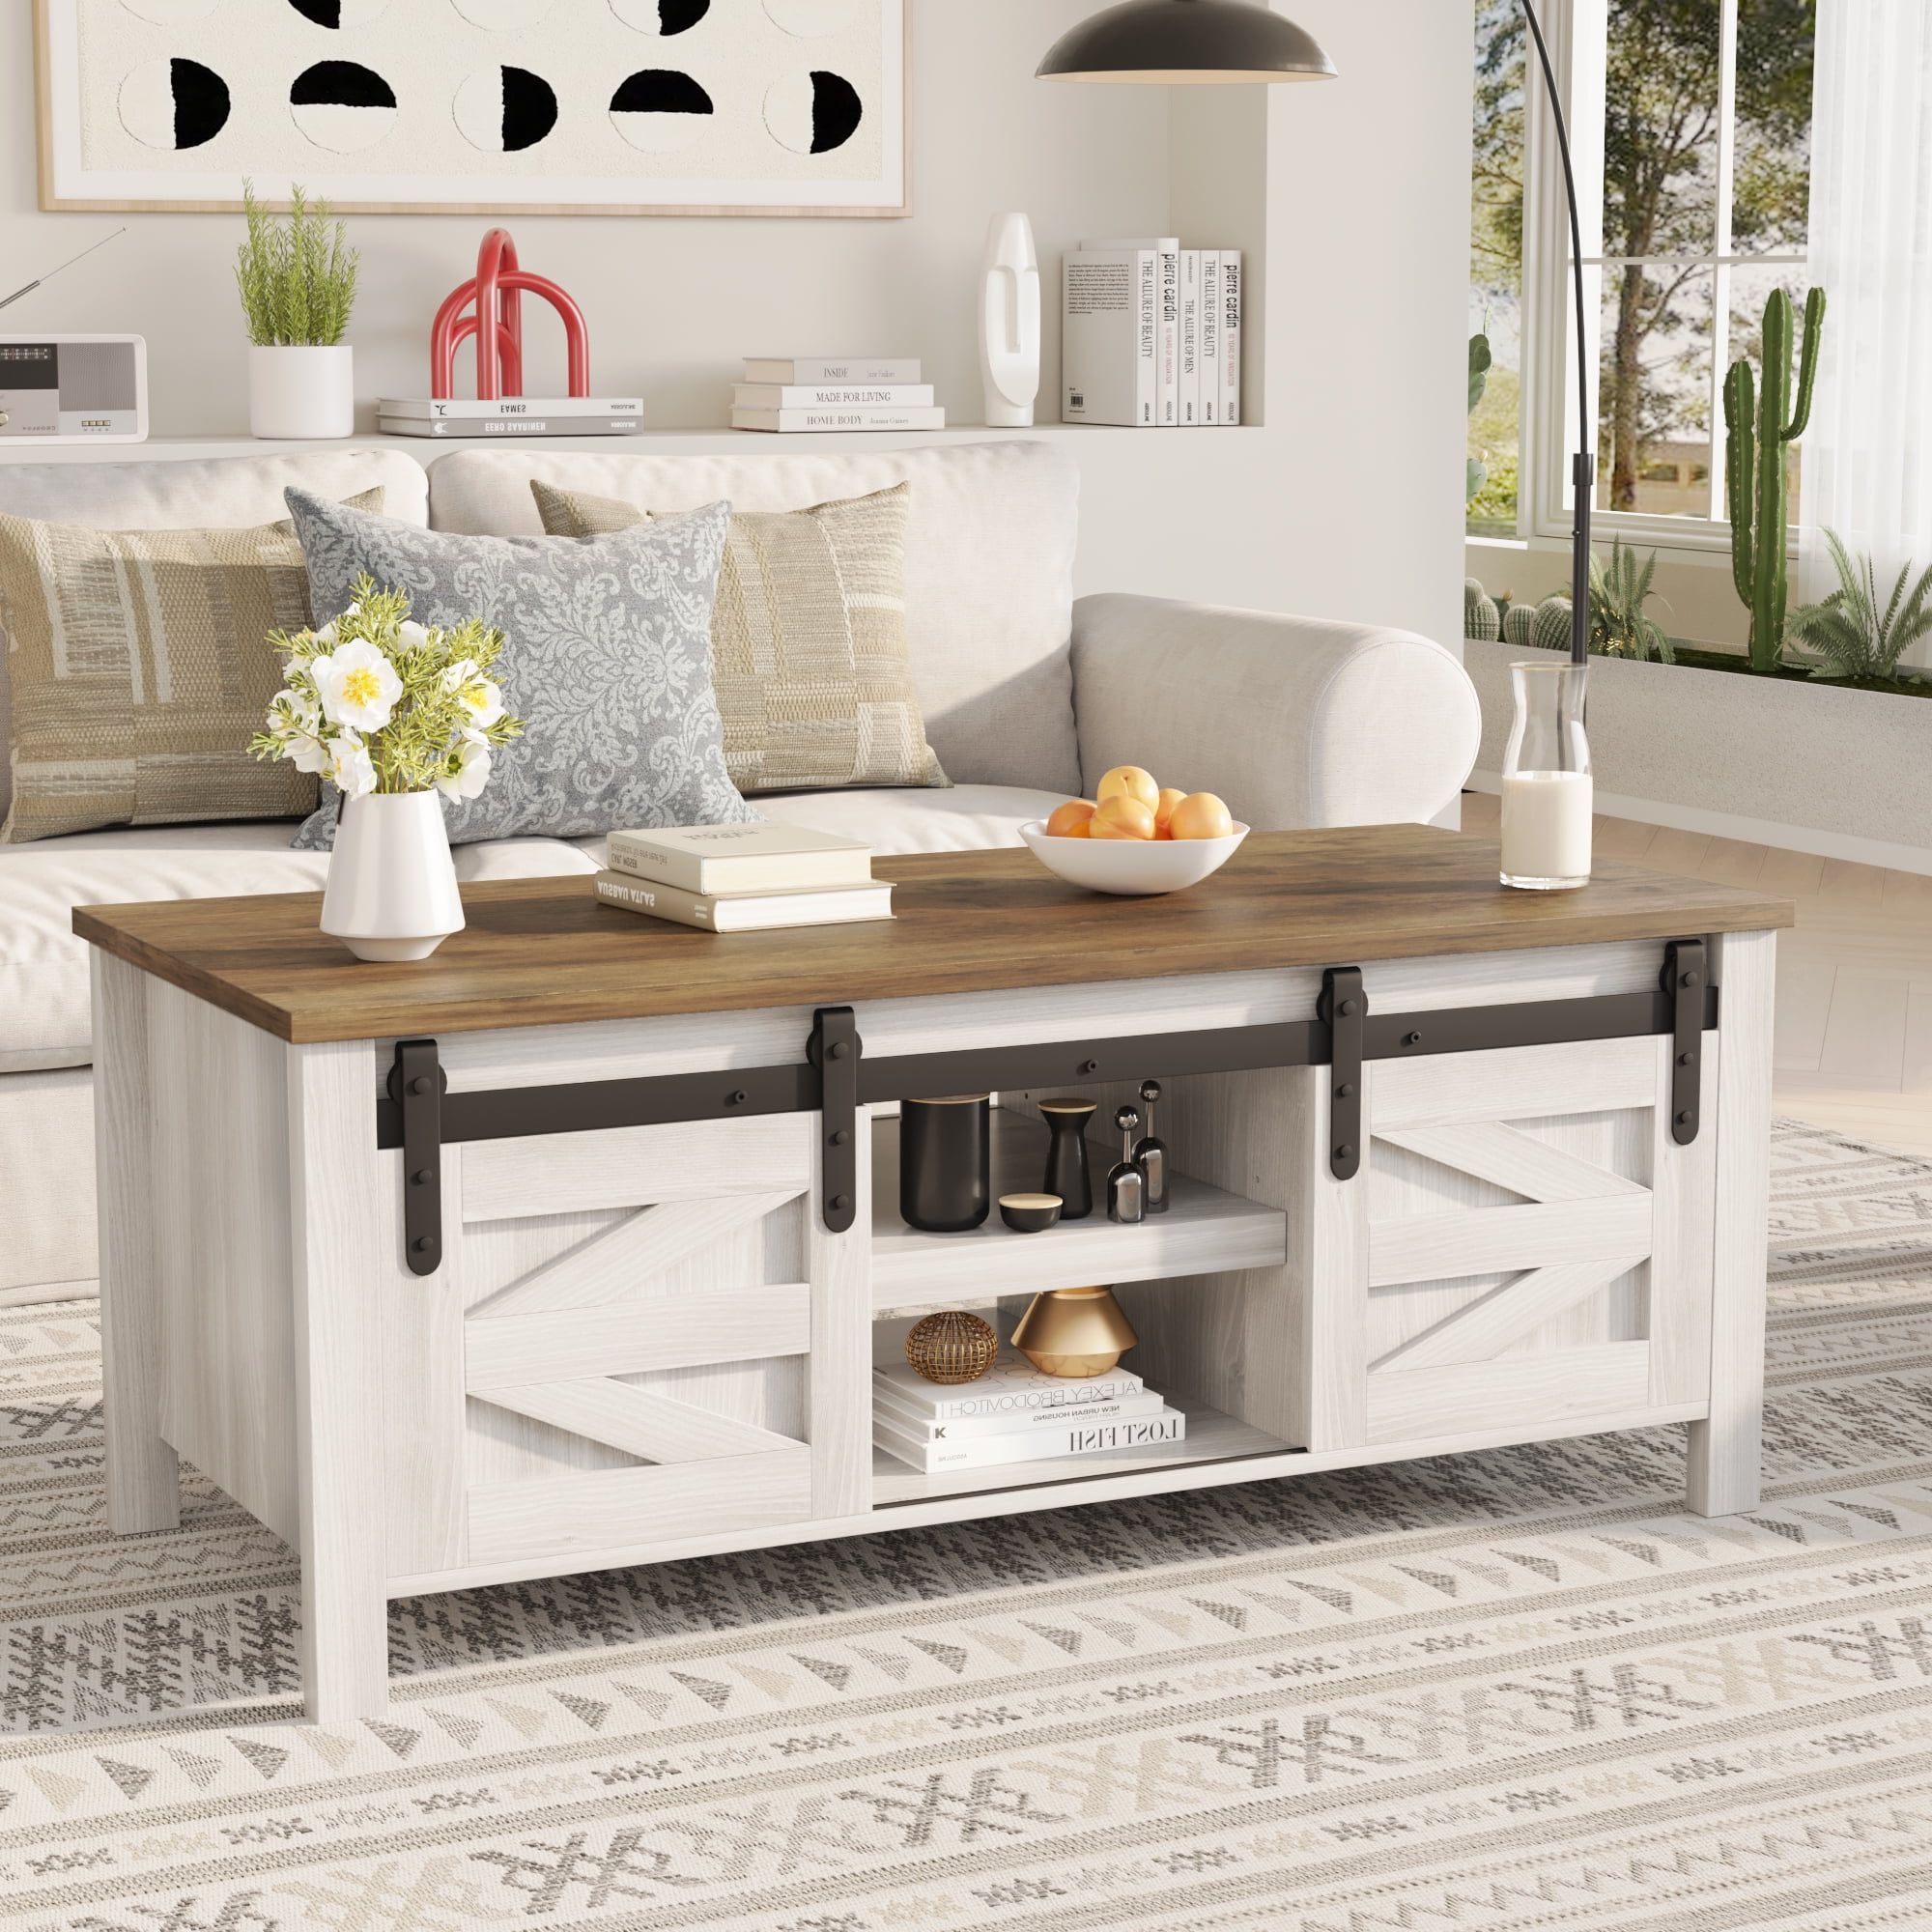 Well Known Coffee Tables With Storage And Barn Doors Regarding Homall Farmhouse Coffee Table Rustic Wooden Center Rectangular Table With Sliding  Barn Doors, Adjustable Cabinet Shelves For Bedroom, Home Office, Living  Room, White – Walmart (View 8 of 10)